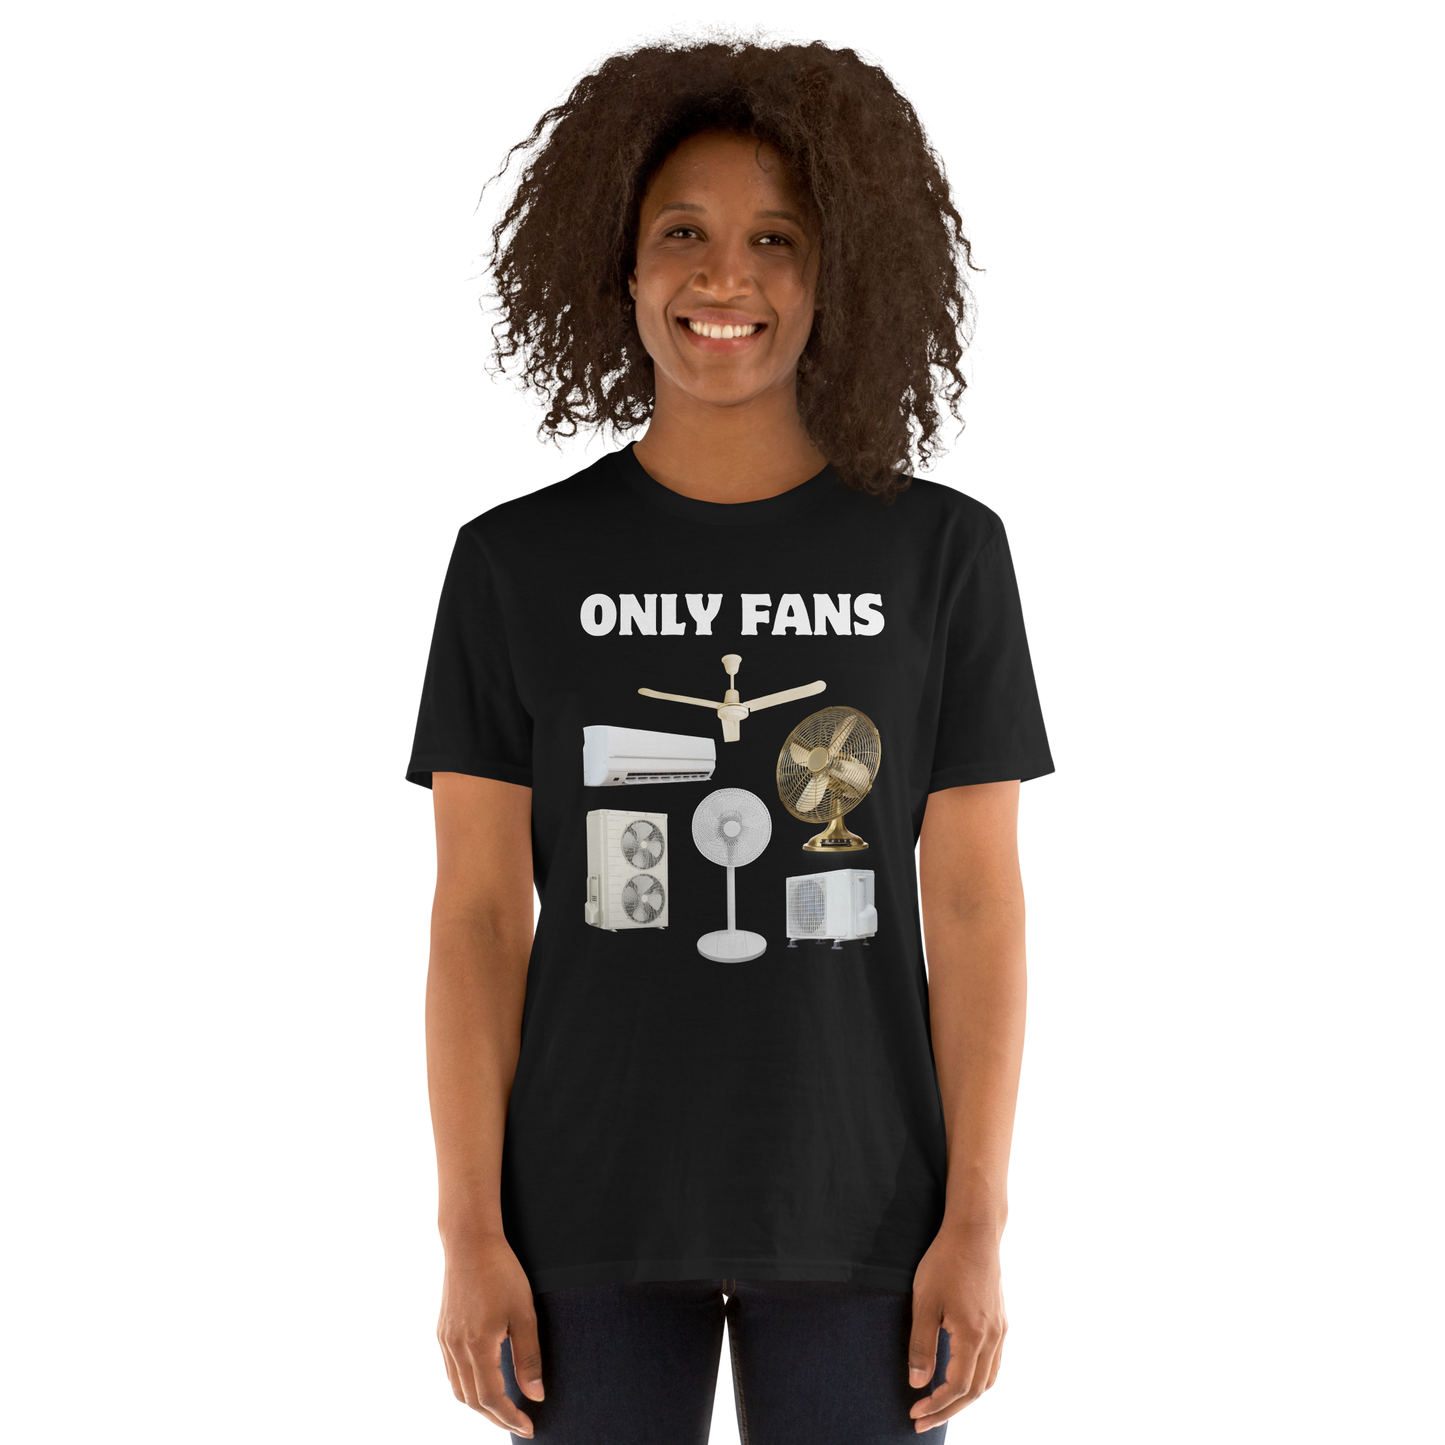 Smiling woman wearing a Black Only Fans T-Shirt featuring a fun Only Fans graphic on the chest - Best Graphic T-Shirts - Boozy Fox